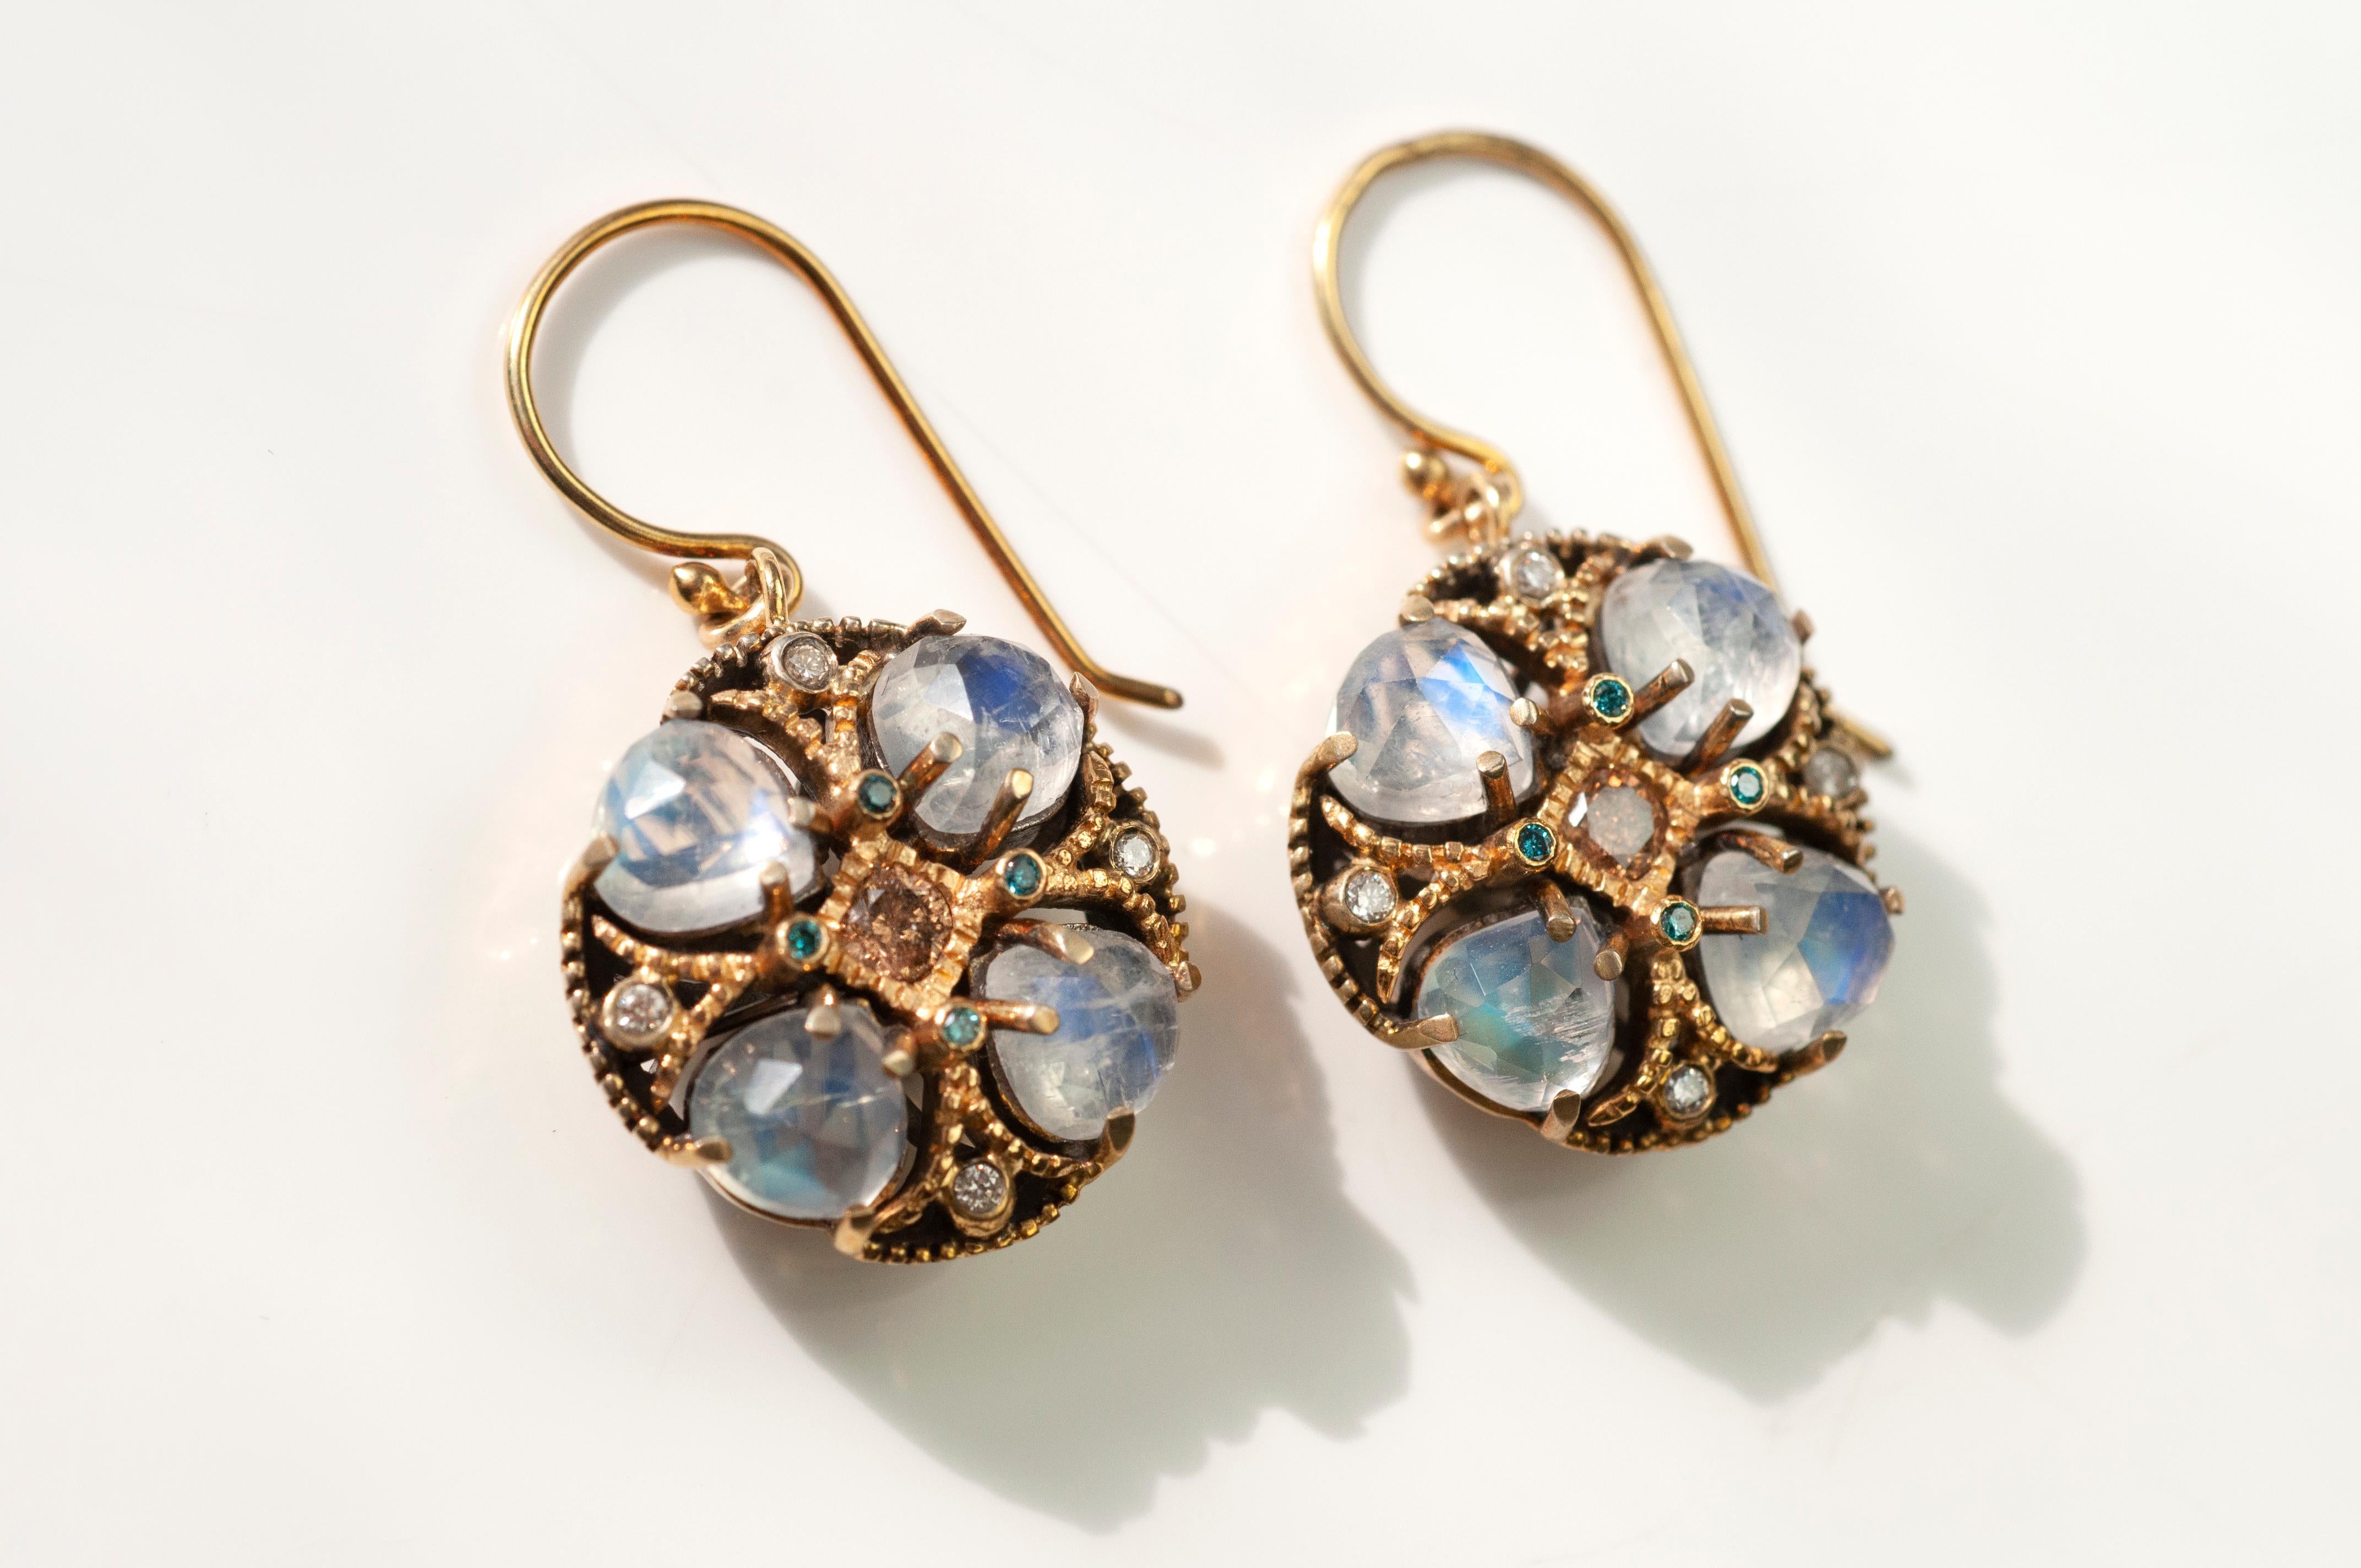 These floral Poppy earrings feature rainbow moonstones 6.00cts and teal and white diamonds 0.58cts with 18K yellow gold and blackened sterling silver gallery detail on the back. They hang at about 1.28inches from 18 K yellow gold ear wire.

Like